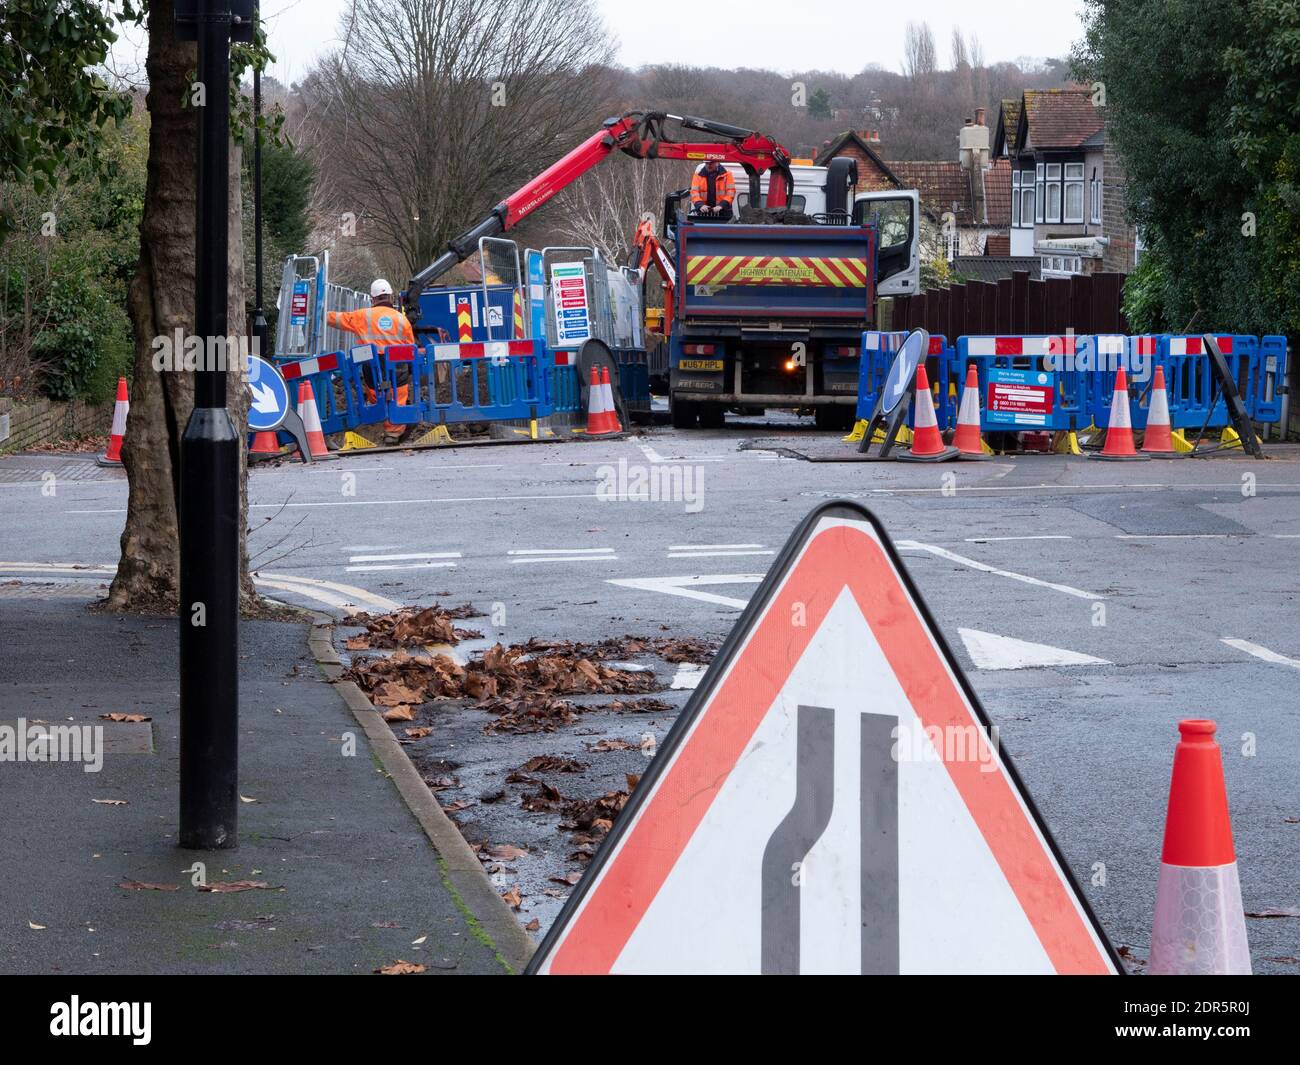 Thames Water dig holes in the road to lay pipes with truck mounted excavator Stock Photo